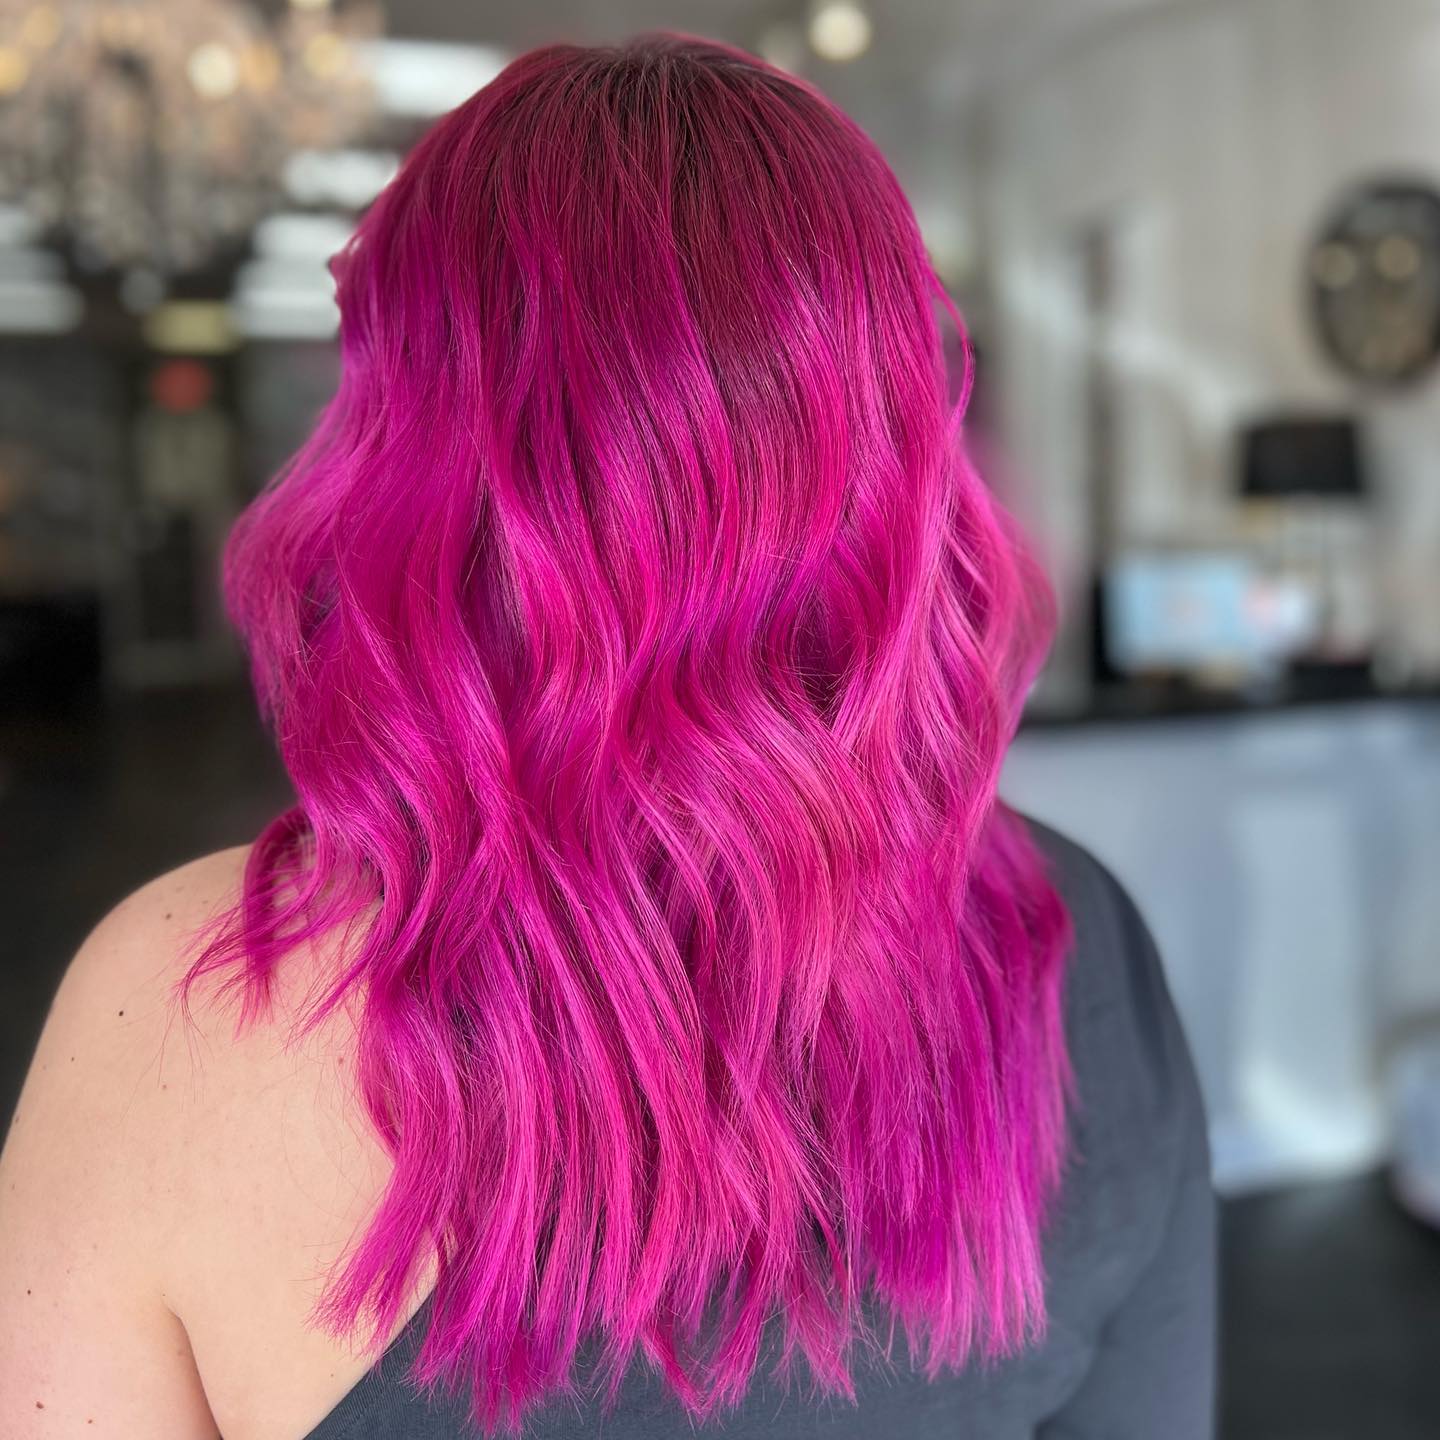 pink ombre hair color 131 Ombre pink hair blonde | Pastel pink ombre hair | Pink balayage Hair Pink Ombre Hair Color for Women